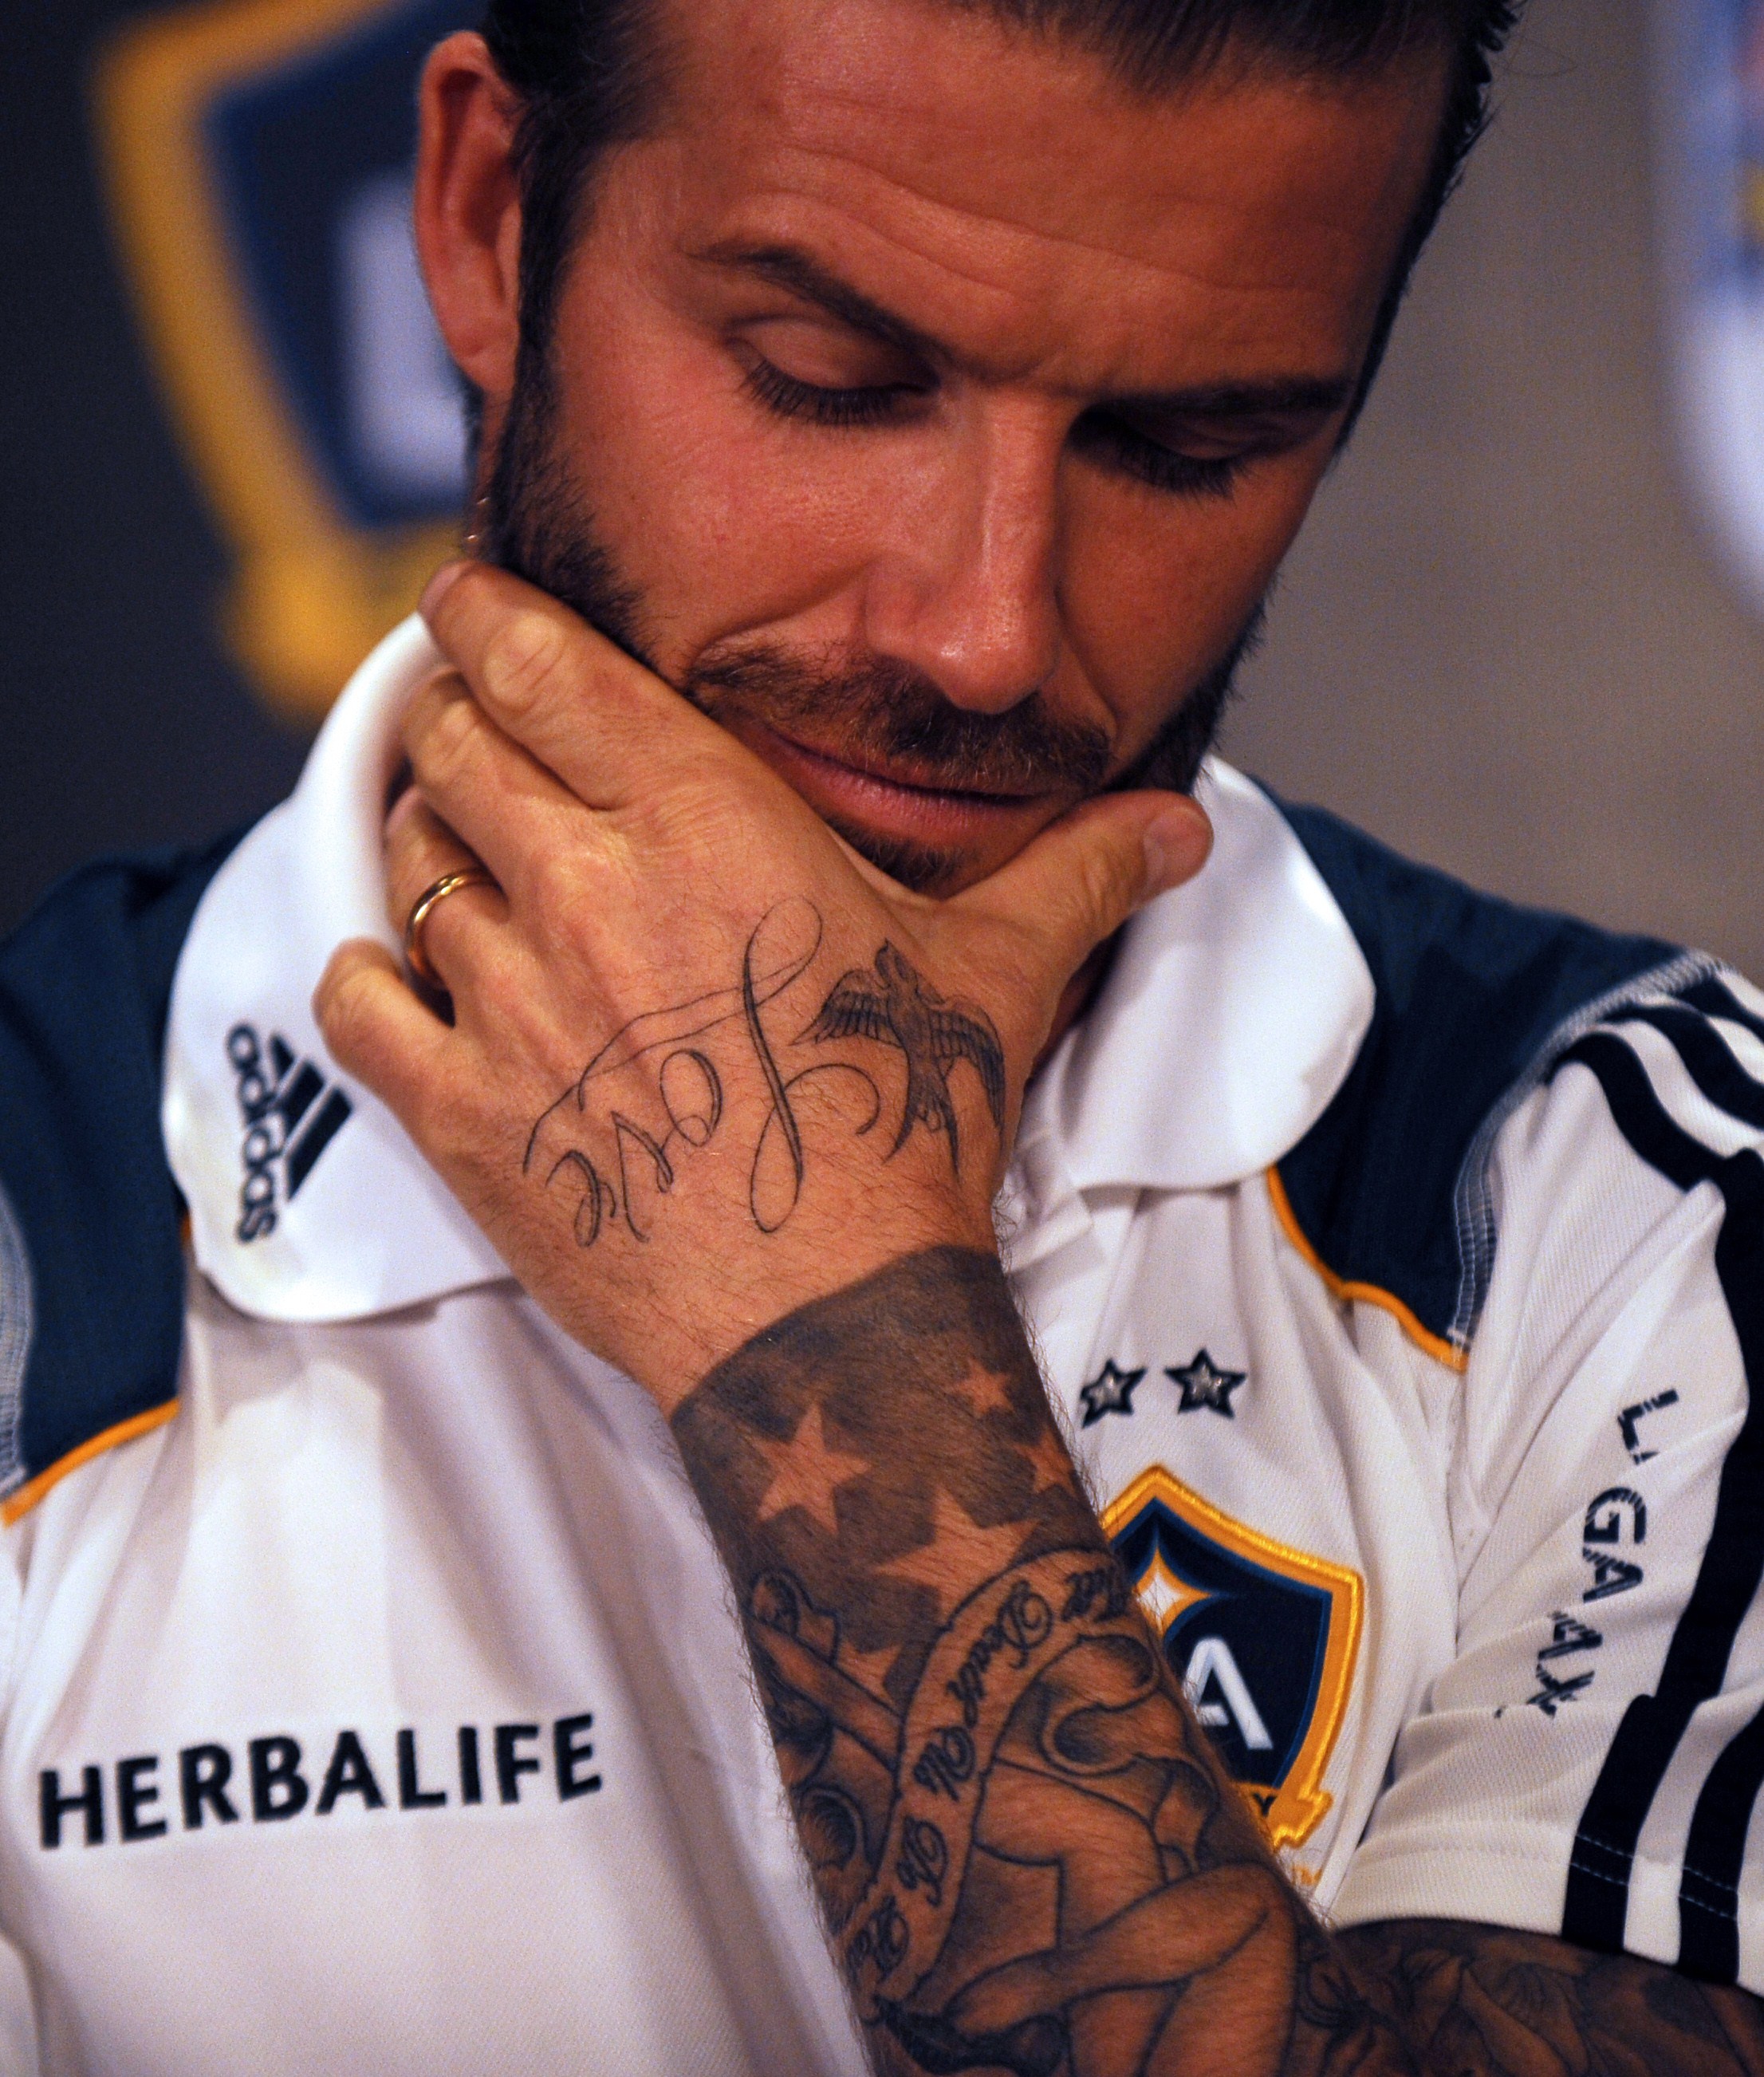 How Many Tattoos Does David Beckham Have? The Man Has A Ton Of Ink